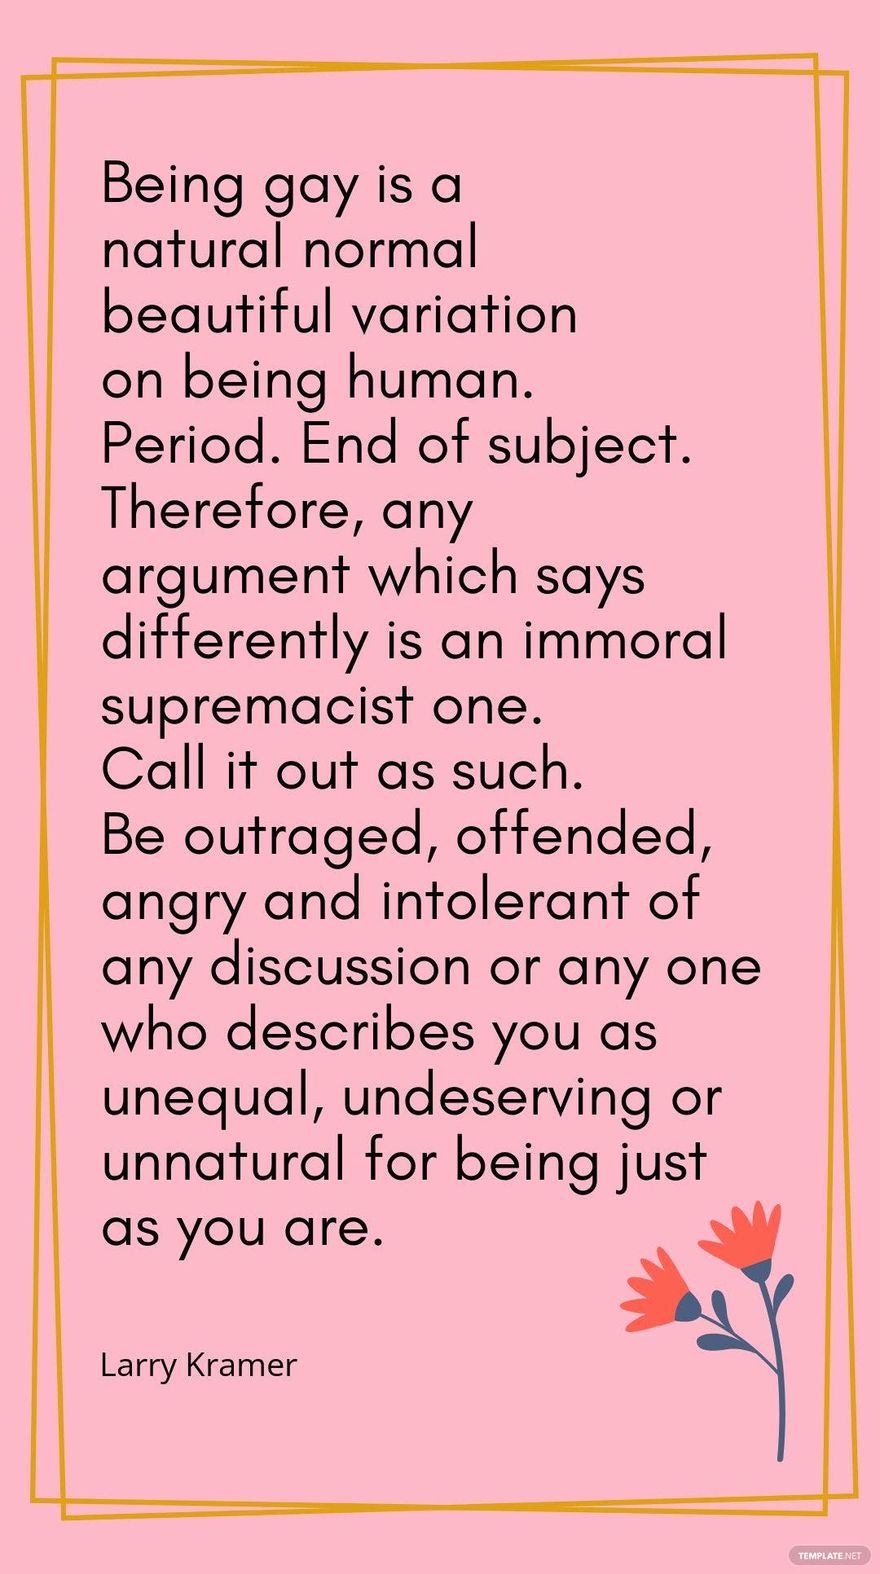 Larry Kramer - Being gay is a natural normal beautiful variation on being human. Period. End of subject. Therefore, any argument which says differently is an immoral supremacist one. Call it out as su in JPG